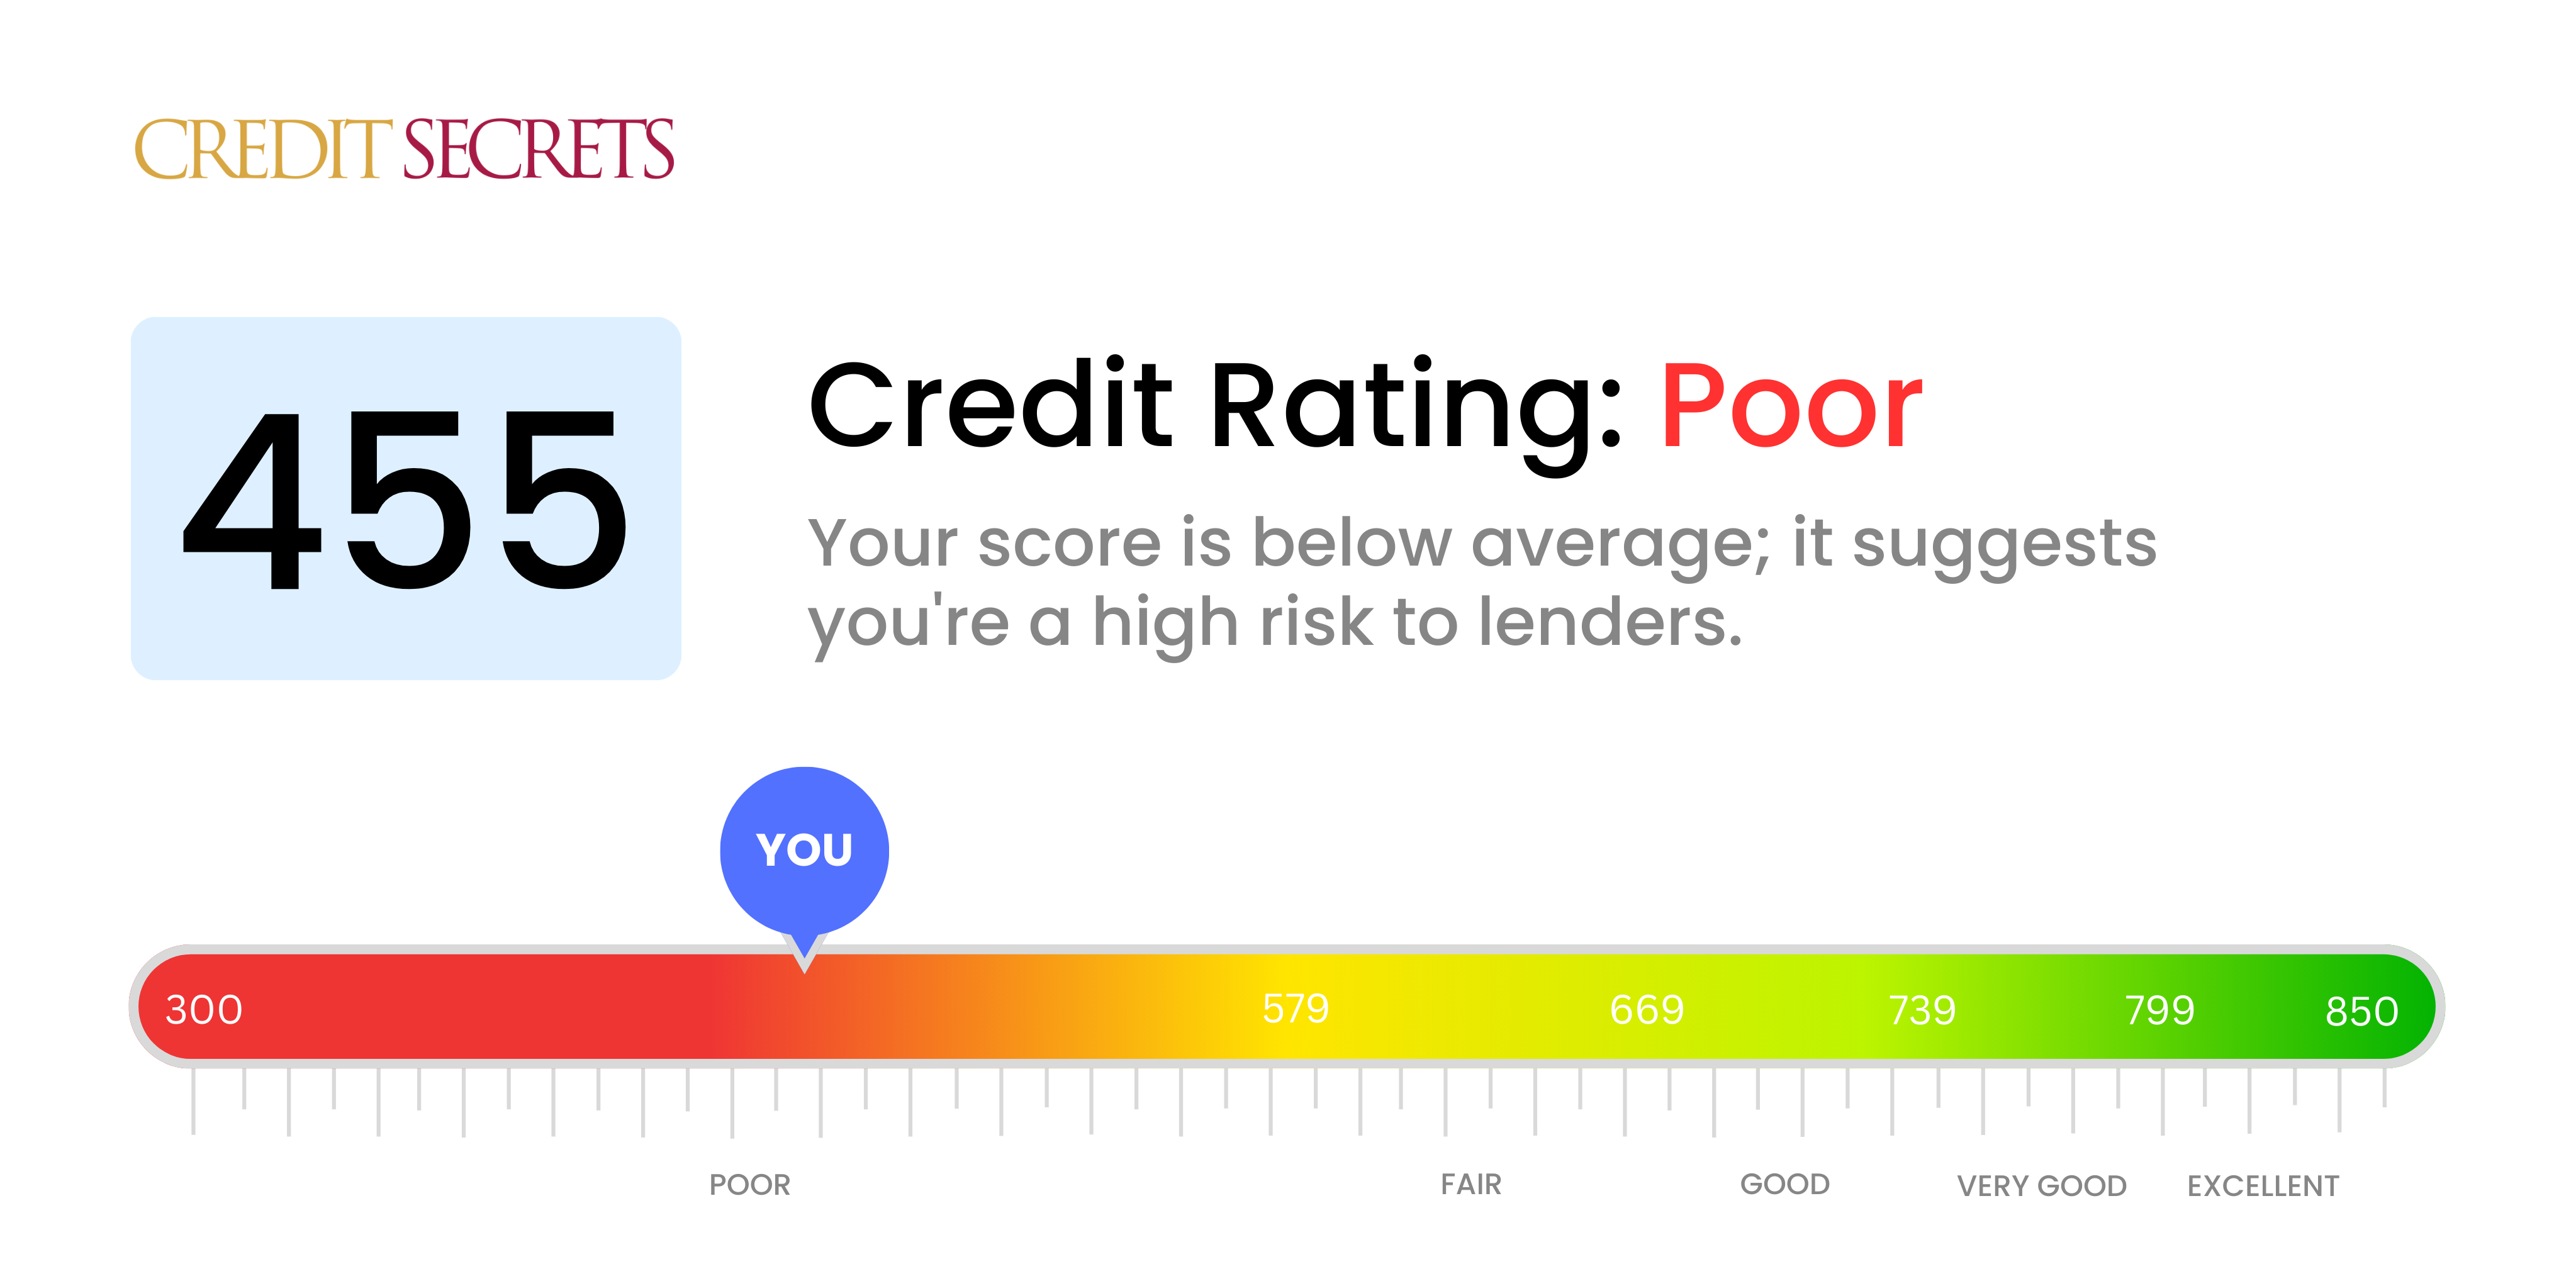 Is 455 a good credit score?